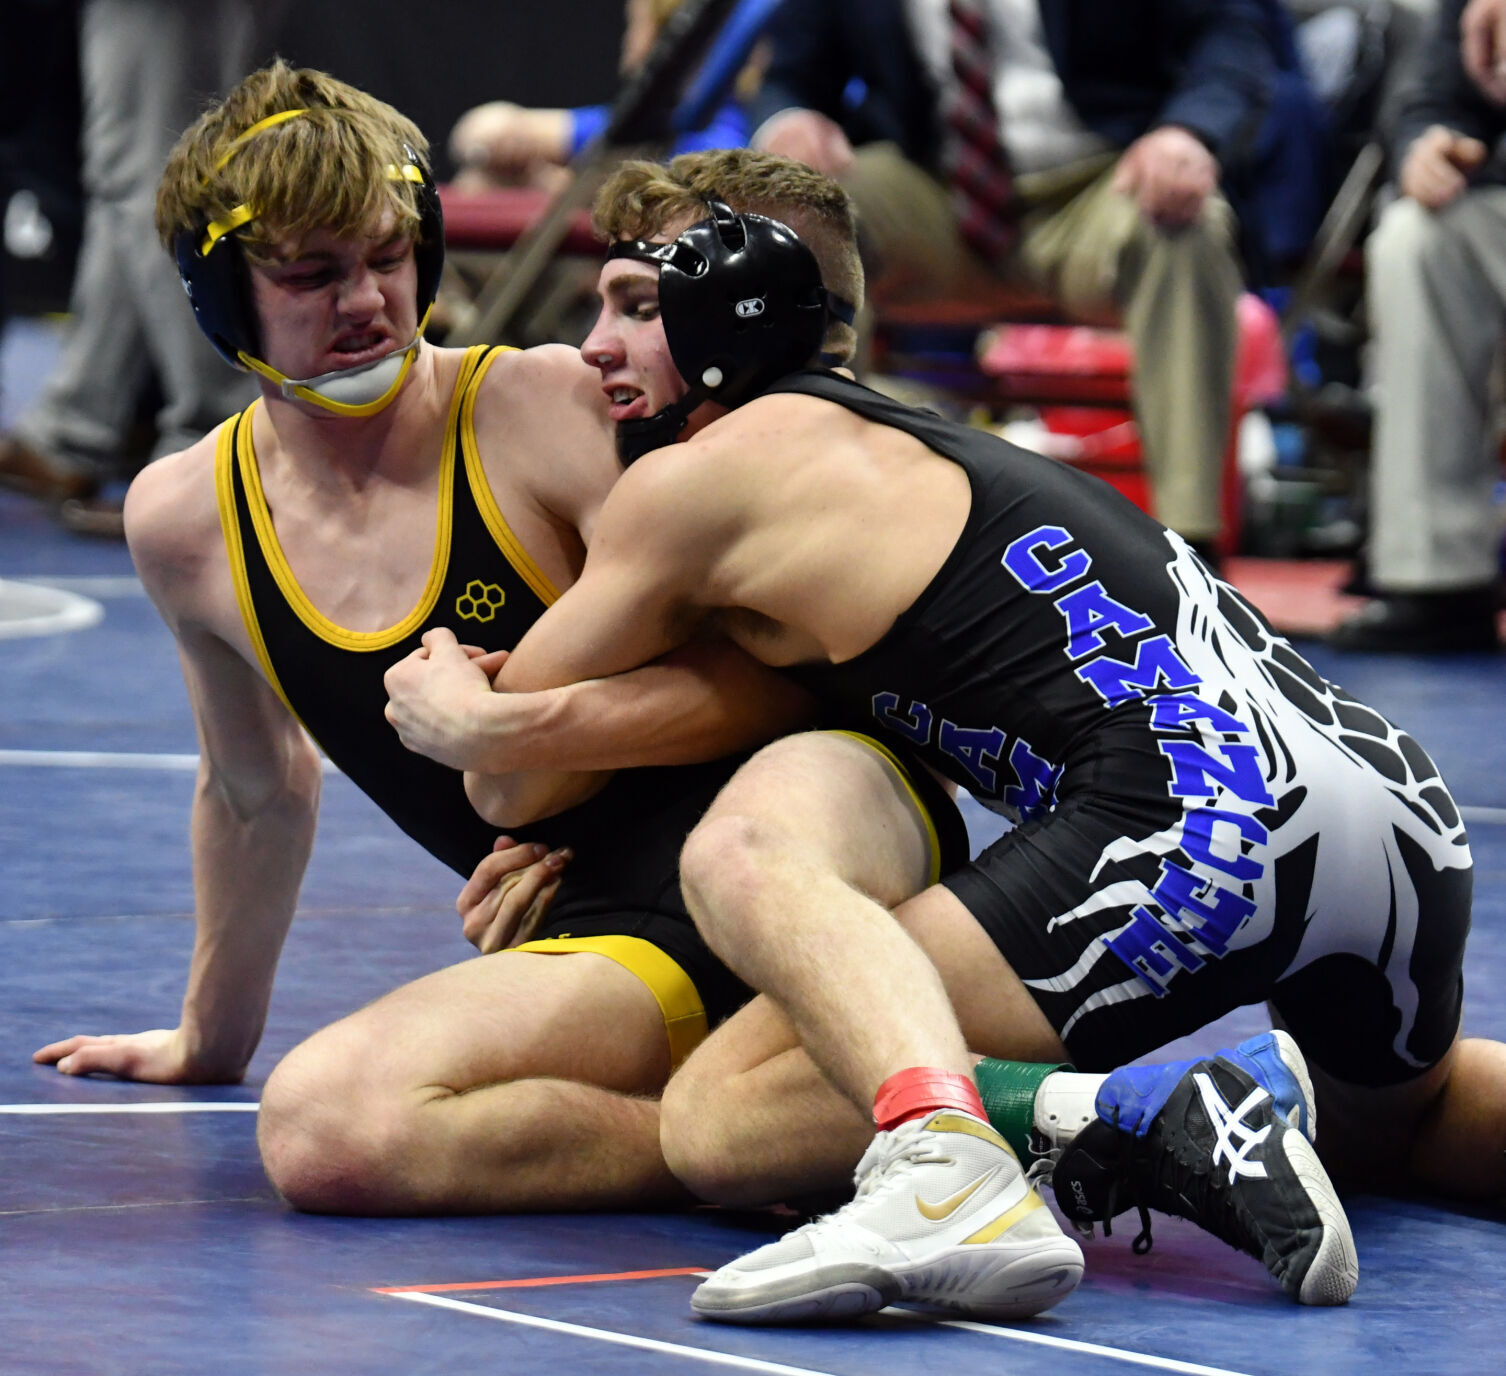 Matts Musings IHSAA made right moves to help wrestling image